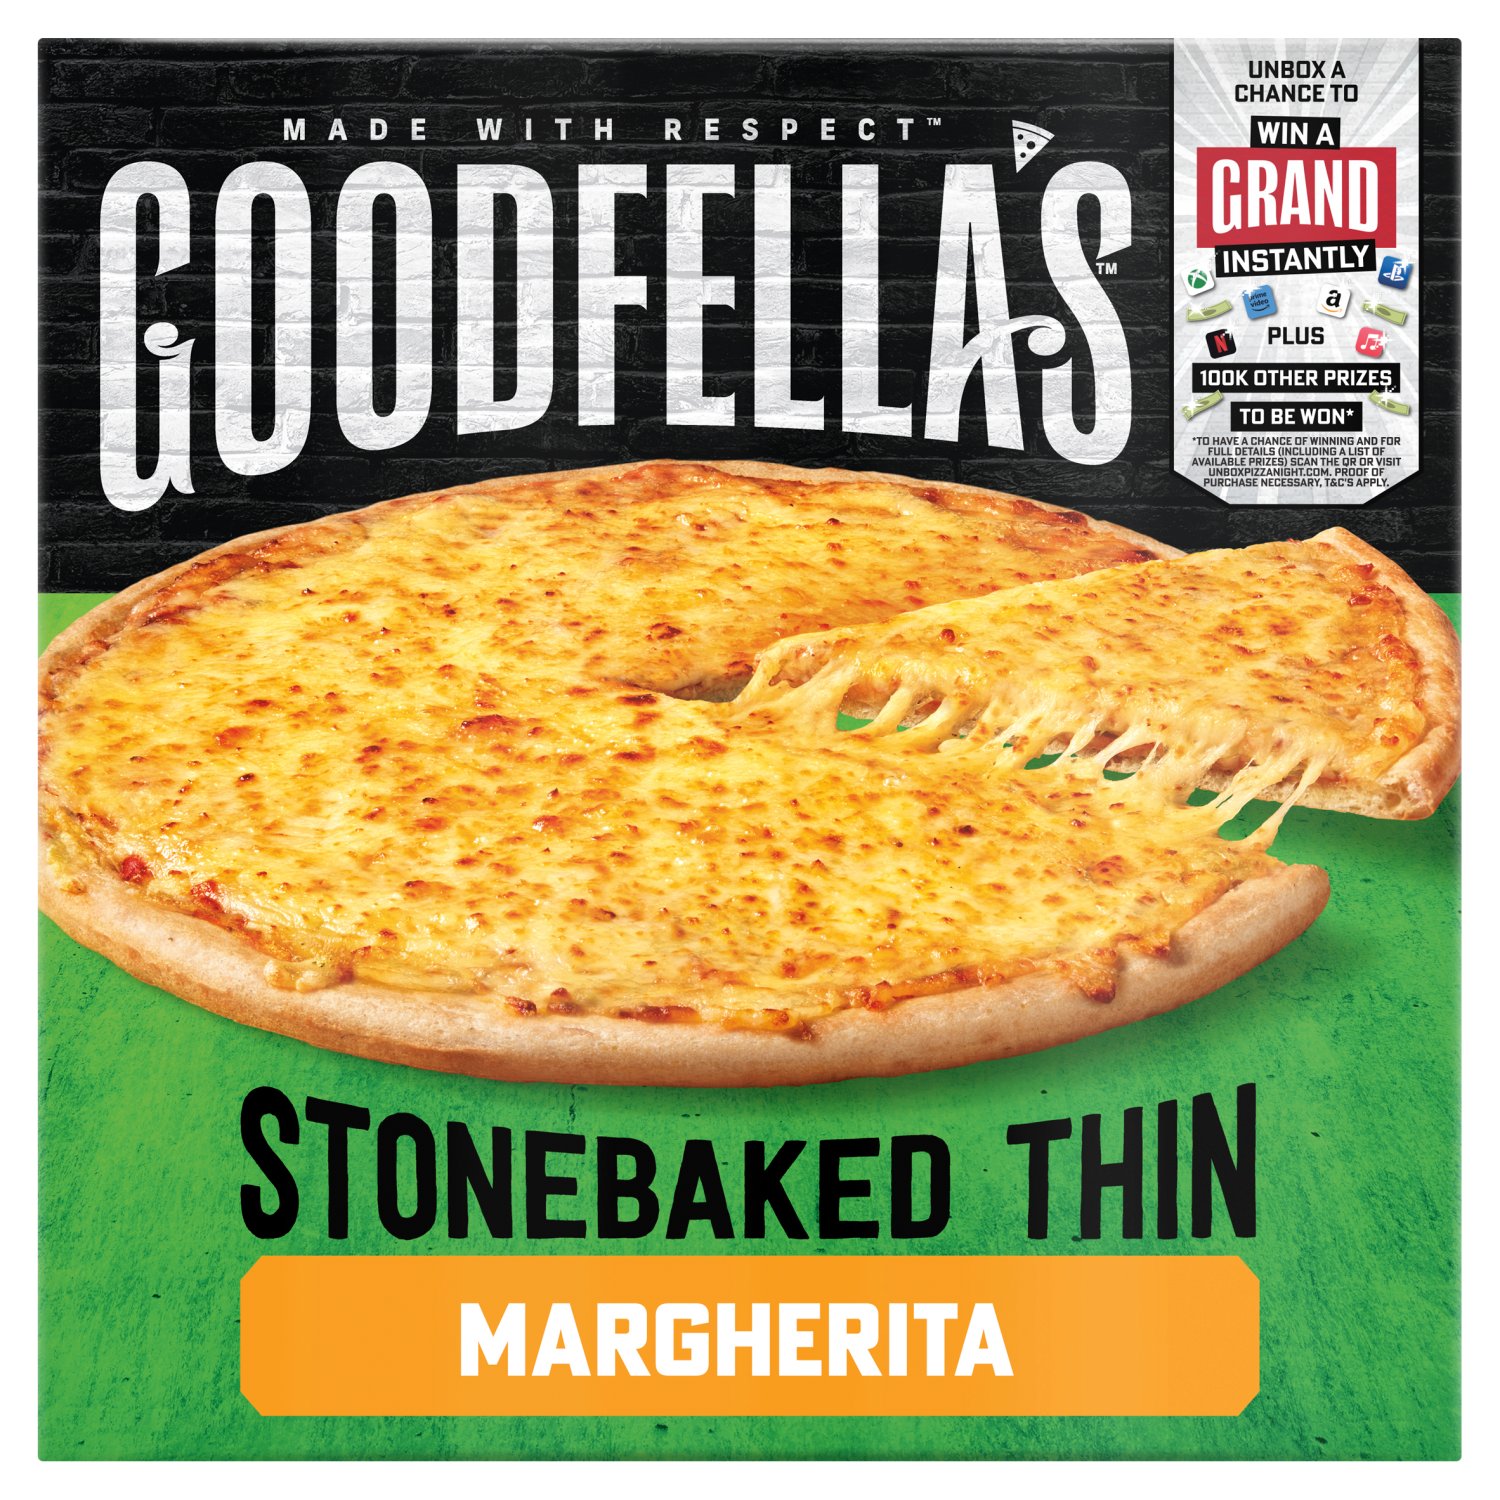 Introducing Goodfella's Stone Baked Thin Margherita Pizza, an unbeatable favourite you simply can't go wrong with.

Goodfella's traditional Italian margherita pizza is stone baked in the classic style until it has a thin and crispy base. It's then topped with rich tomato sauce and a delicious blend of mouth-watering cheeses - a frozen pizza that's absolutely 10 out of 10!

A frozen margherita pizza with a side of salad makes for an easy yet tasty dinner that always goes down a treat. Simply delicious.

Welcome to the Neighbourhood
Here at Goodfella's we are passionate about pizza, from the dough that has been rested, then baked on Italian stone for a crispy base to our signature tomato sauces.
Our pizzas are immediately frozen to lock in that great taste. This delicious Margherita Pizza is no exception! Italian American style pizza from the Goodfella's family.